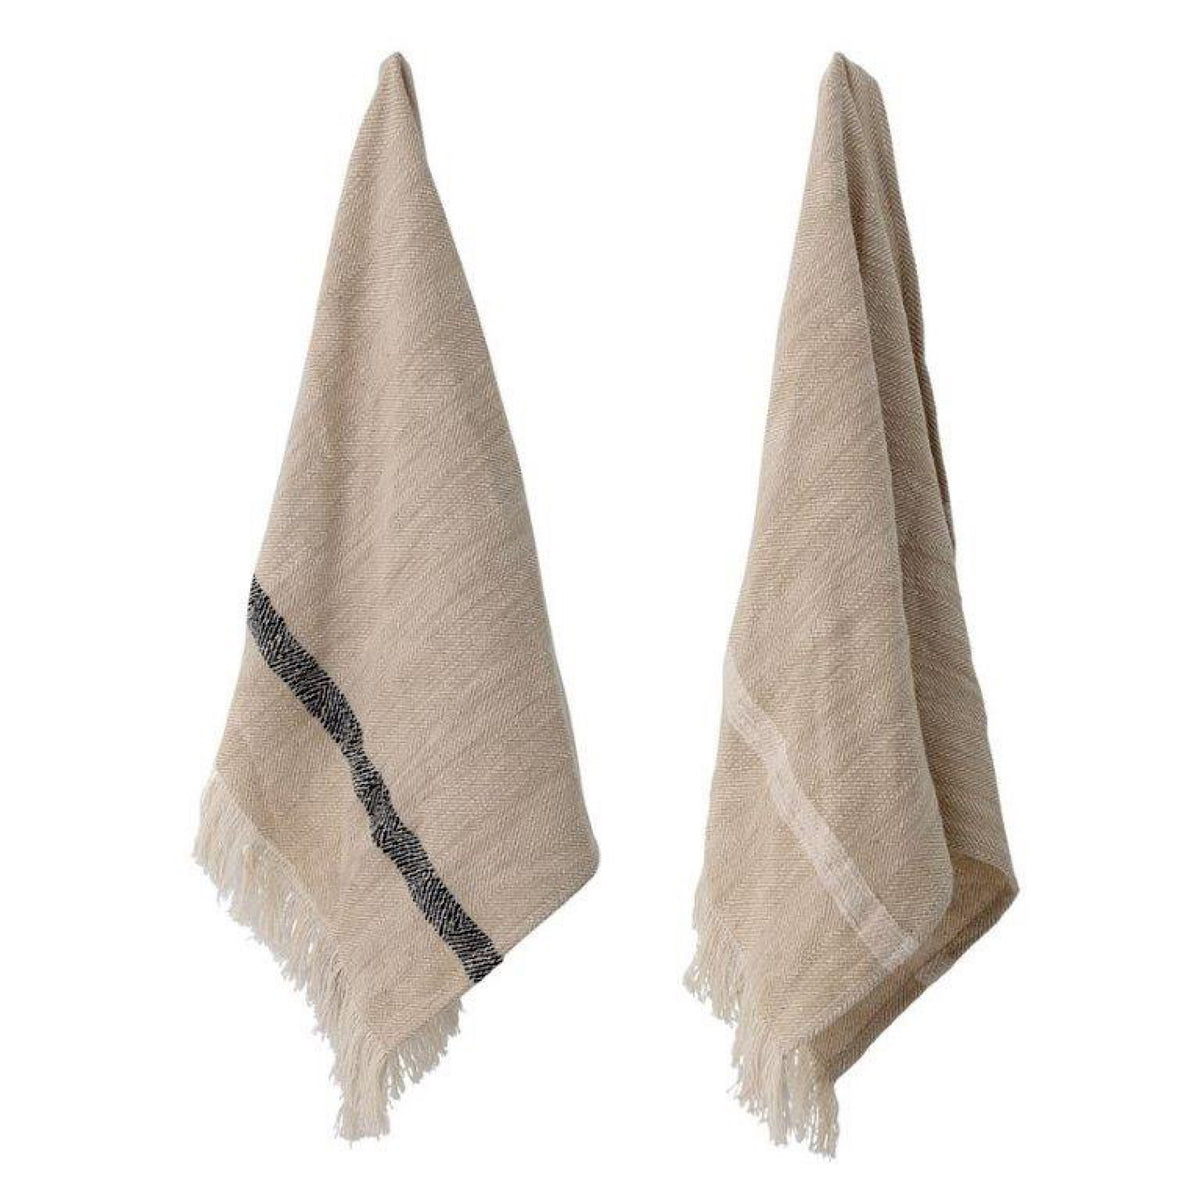 Woven Cotton Tea Towels with Fringe, Set of 2